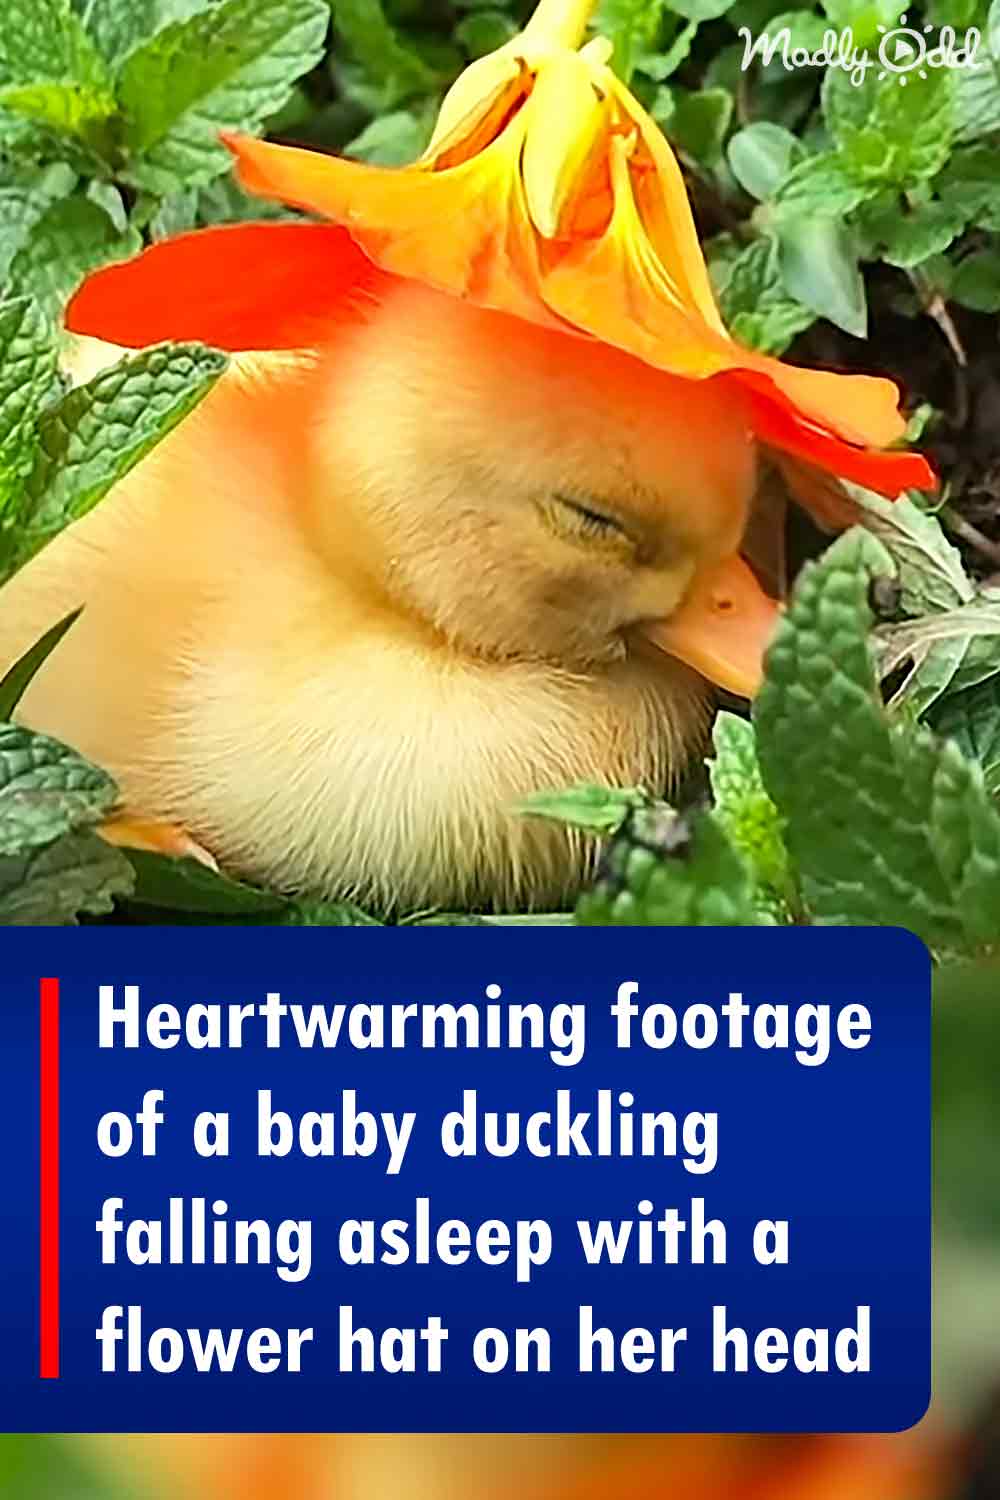 Heartwarming footage of a baby duckling falling asleep with a flower hat on her head